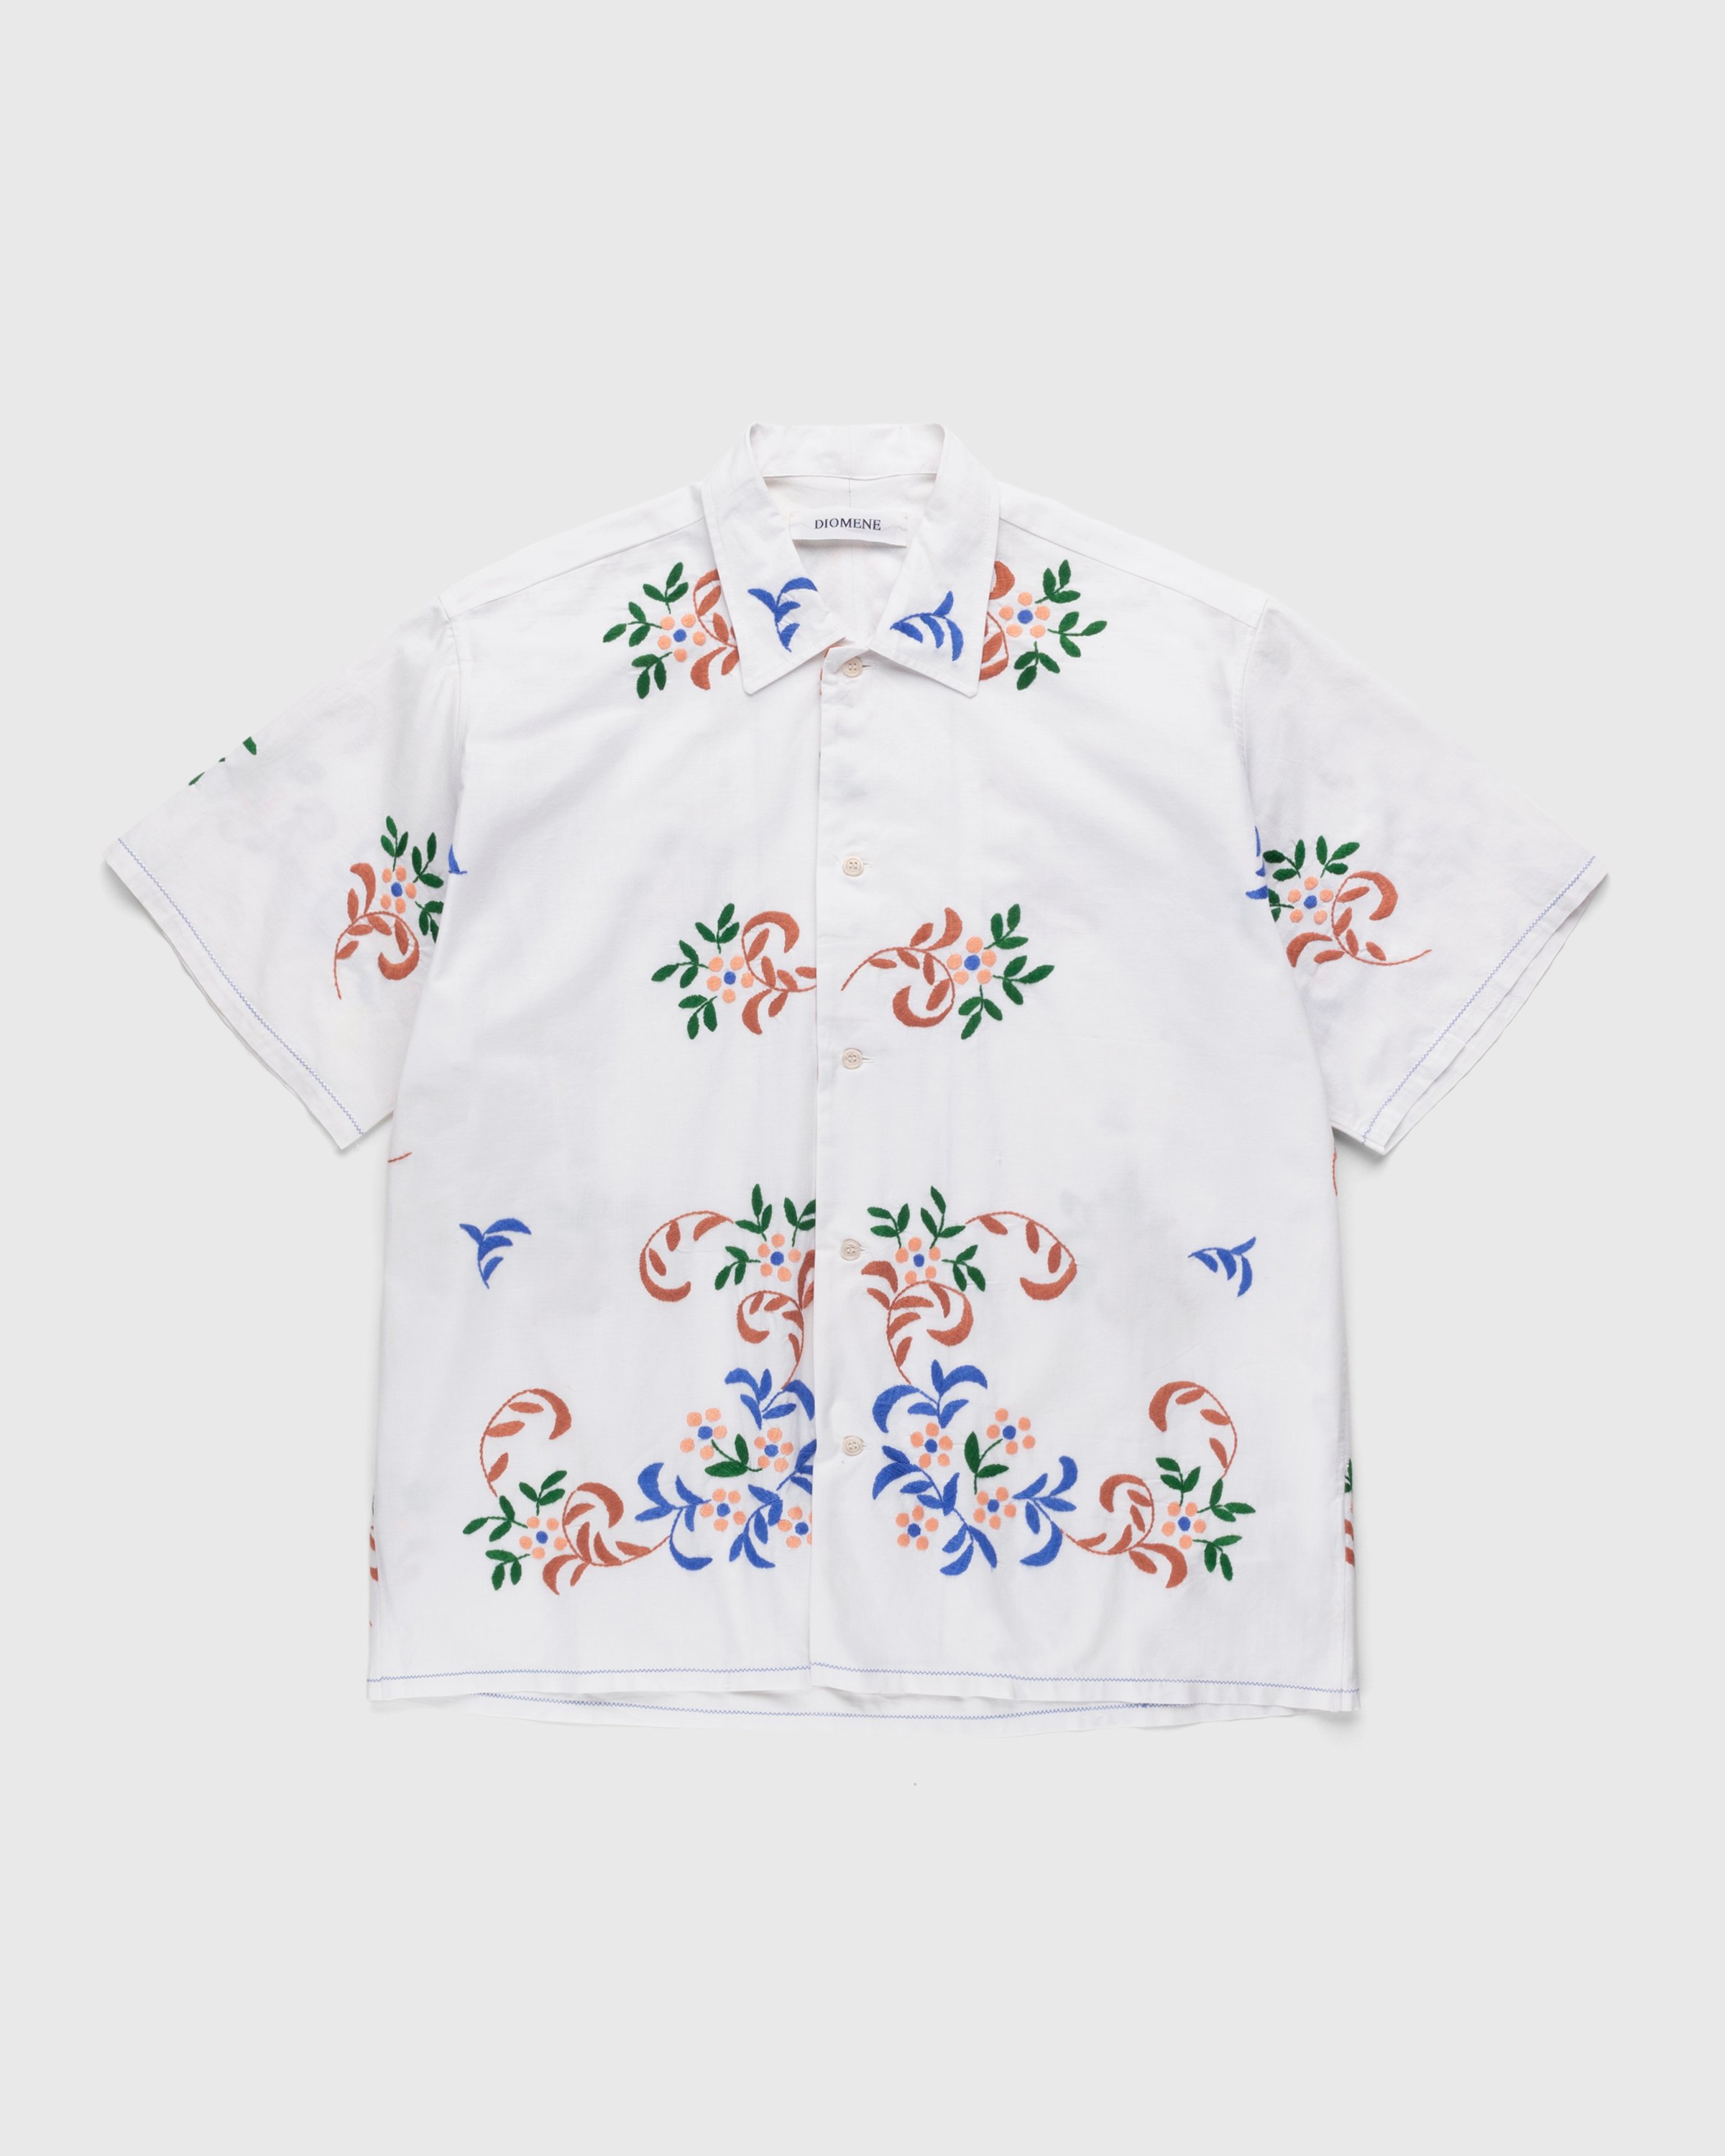 Diomene by Damir Doma - Embroidered Vacation Shirt White/Blue - Clothing - White - Image 1